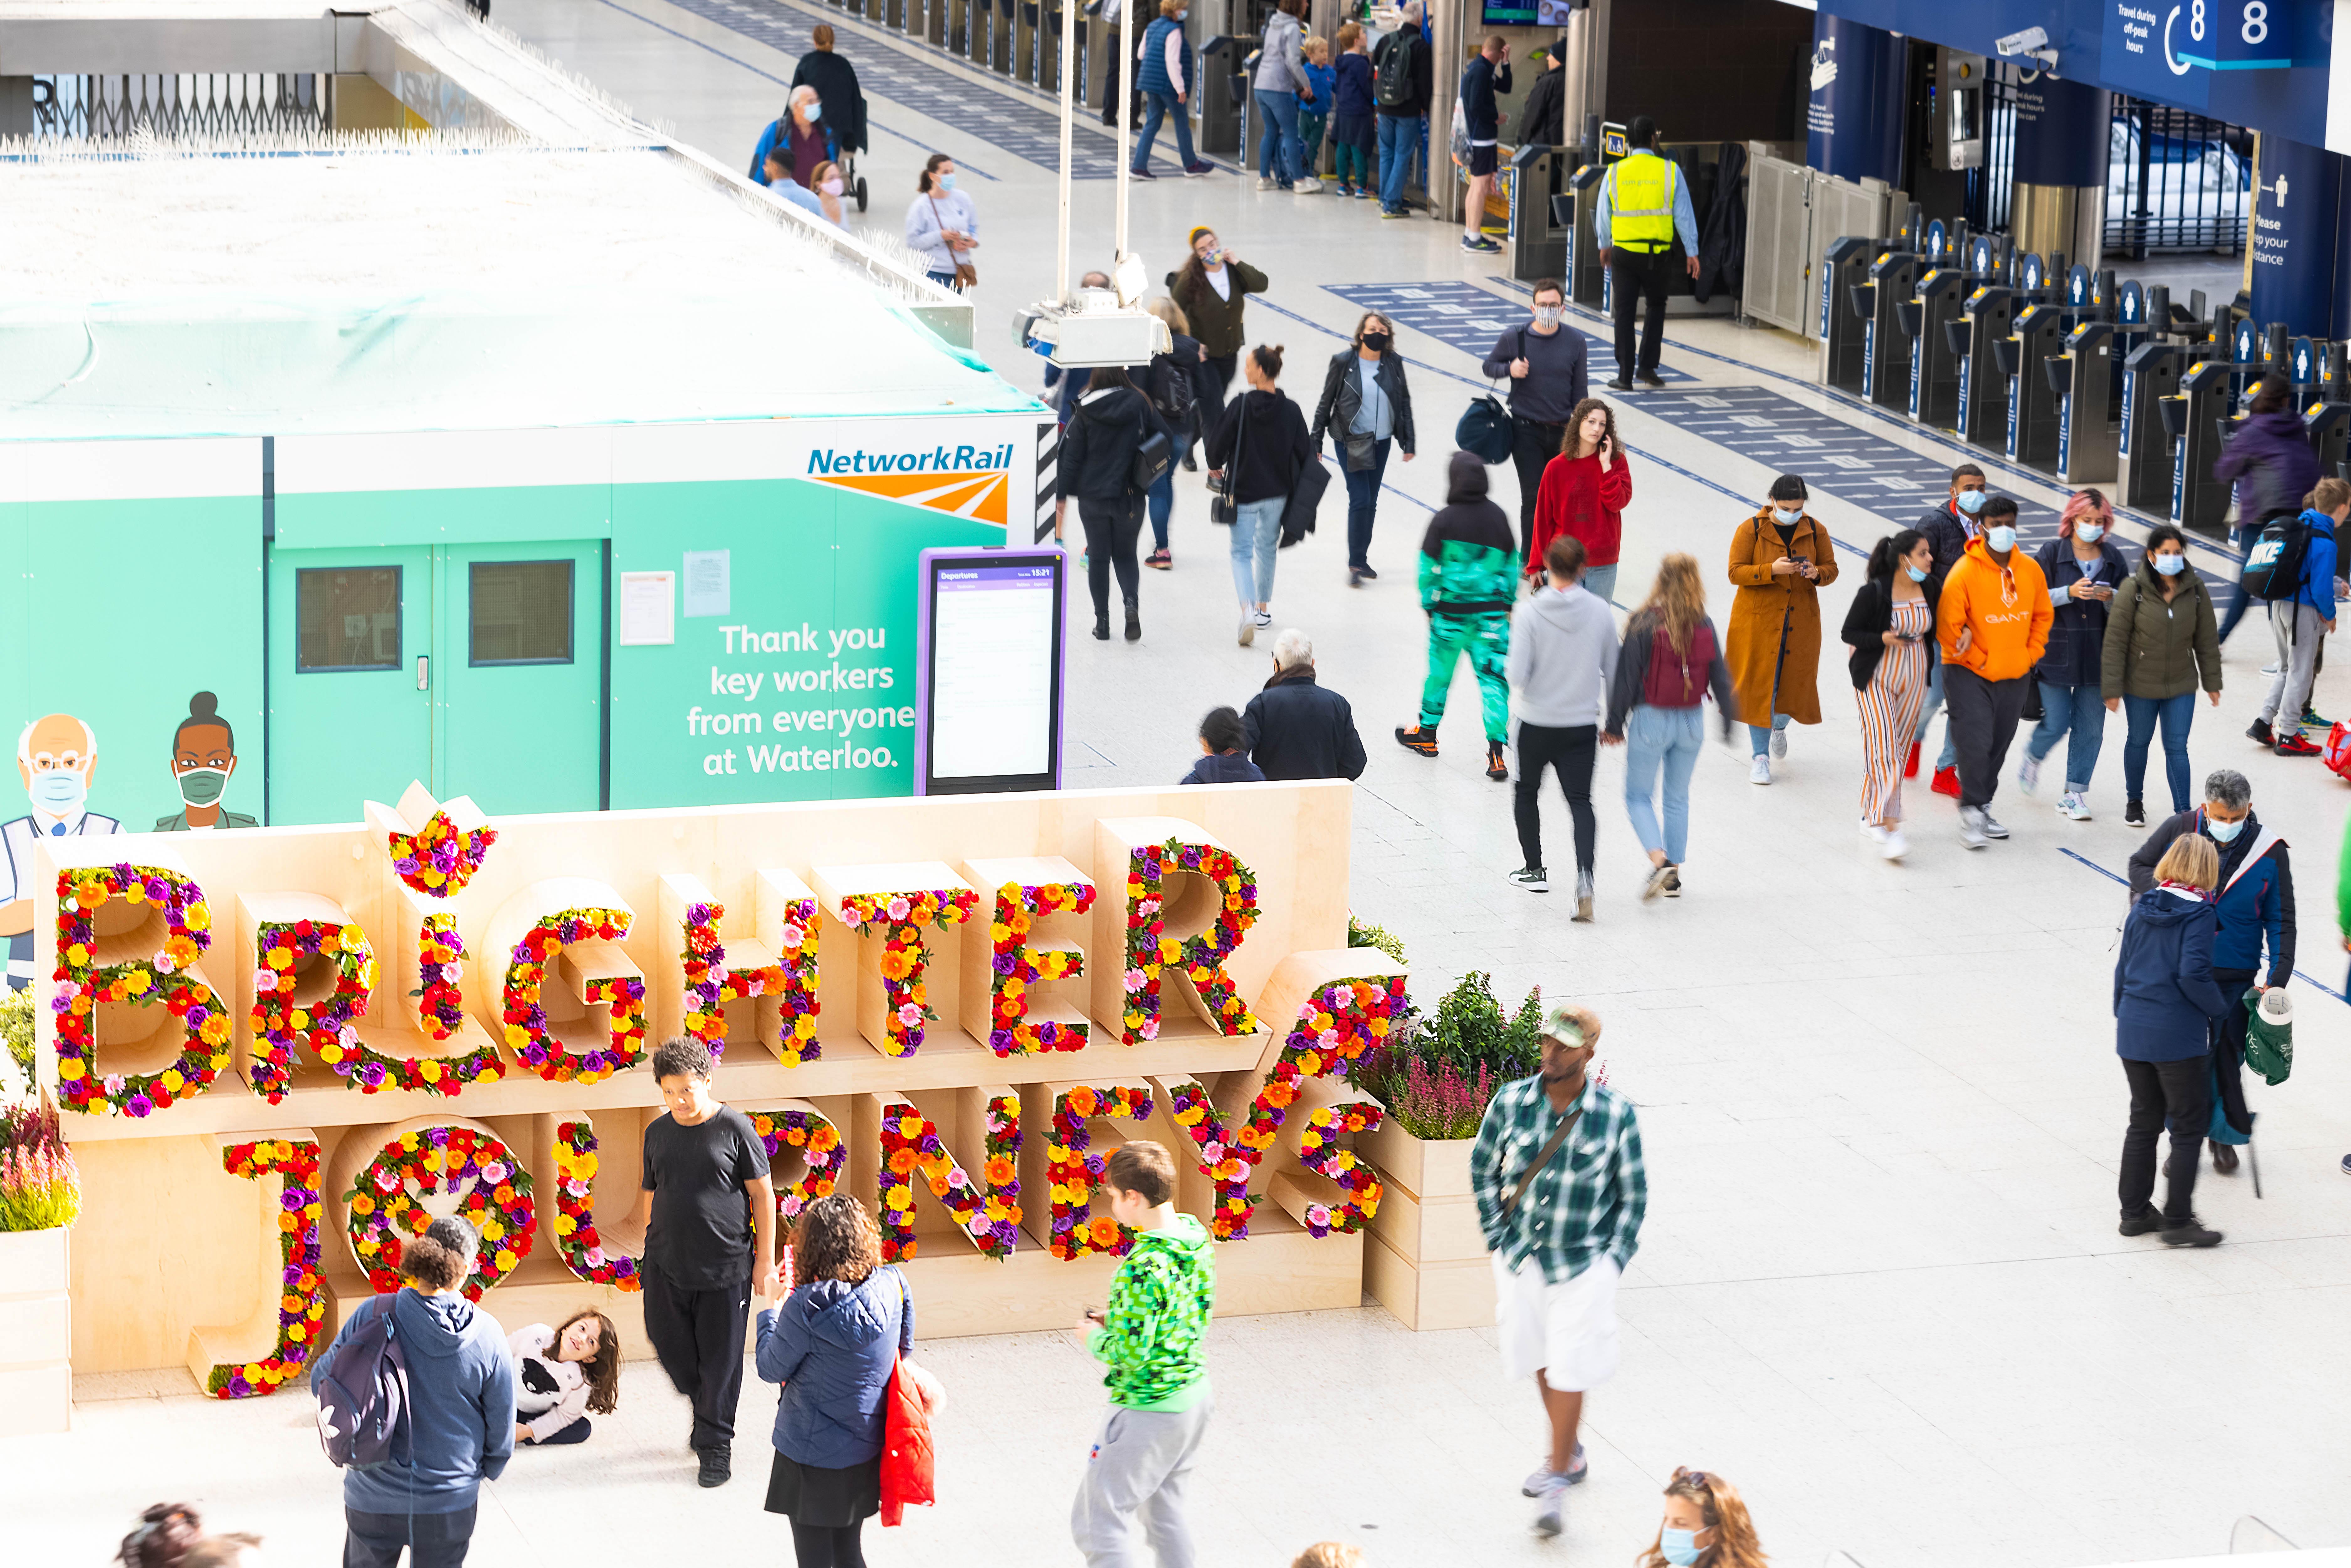 Sensory floral installation unveiled at London Waterloo